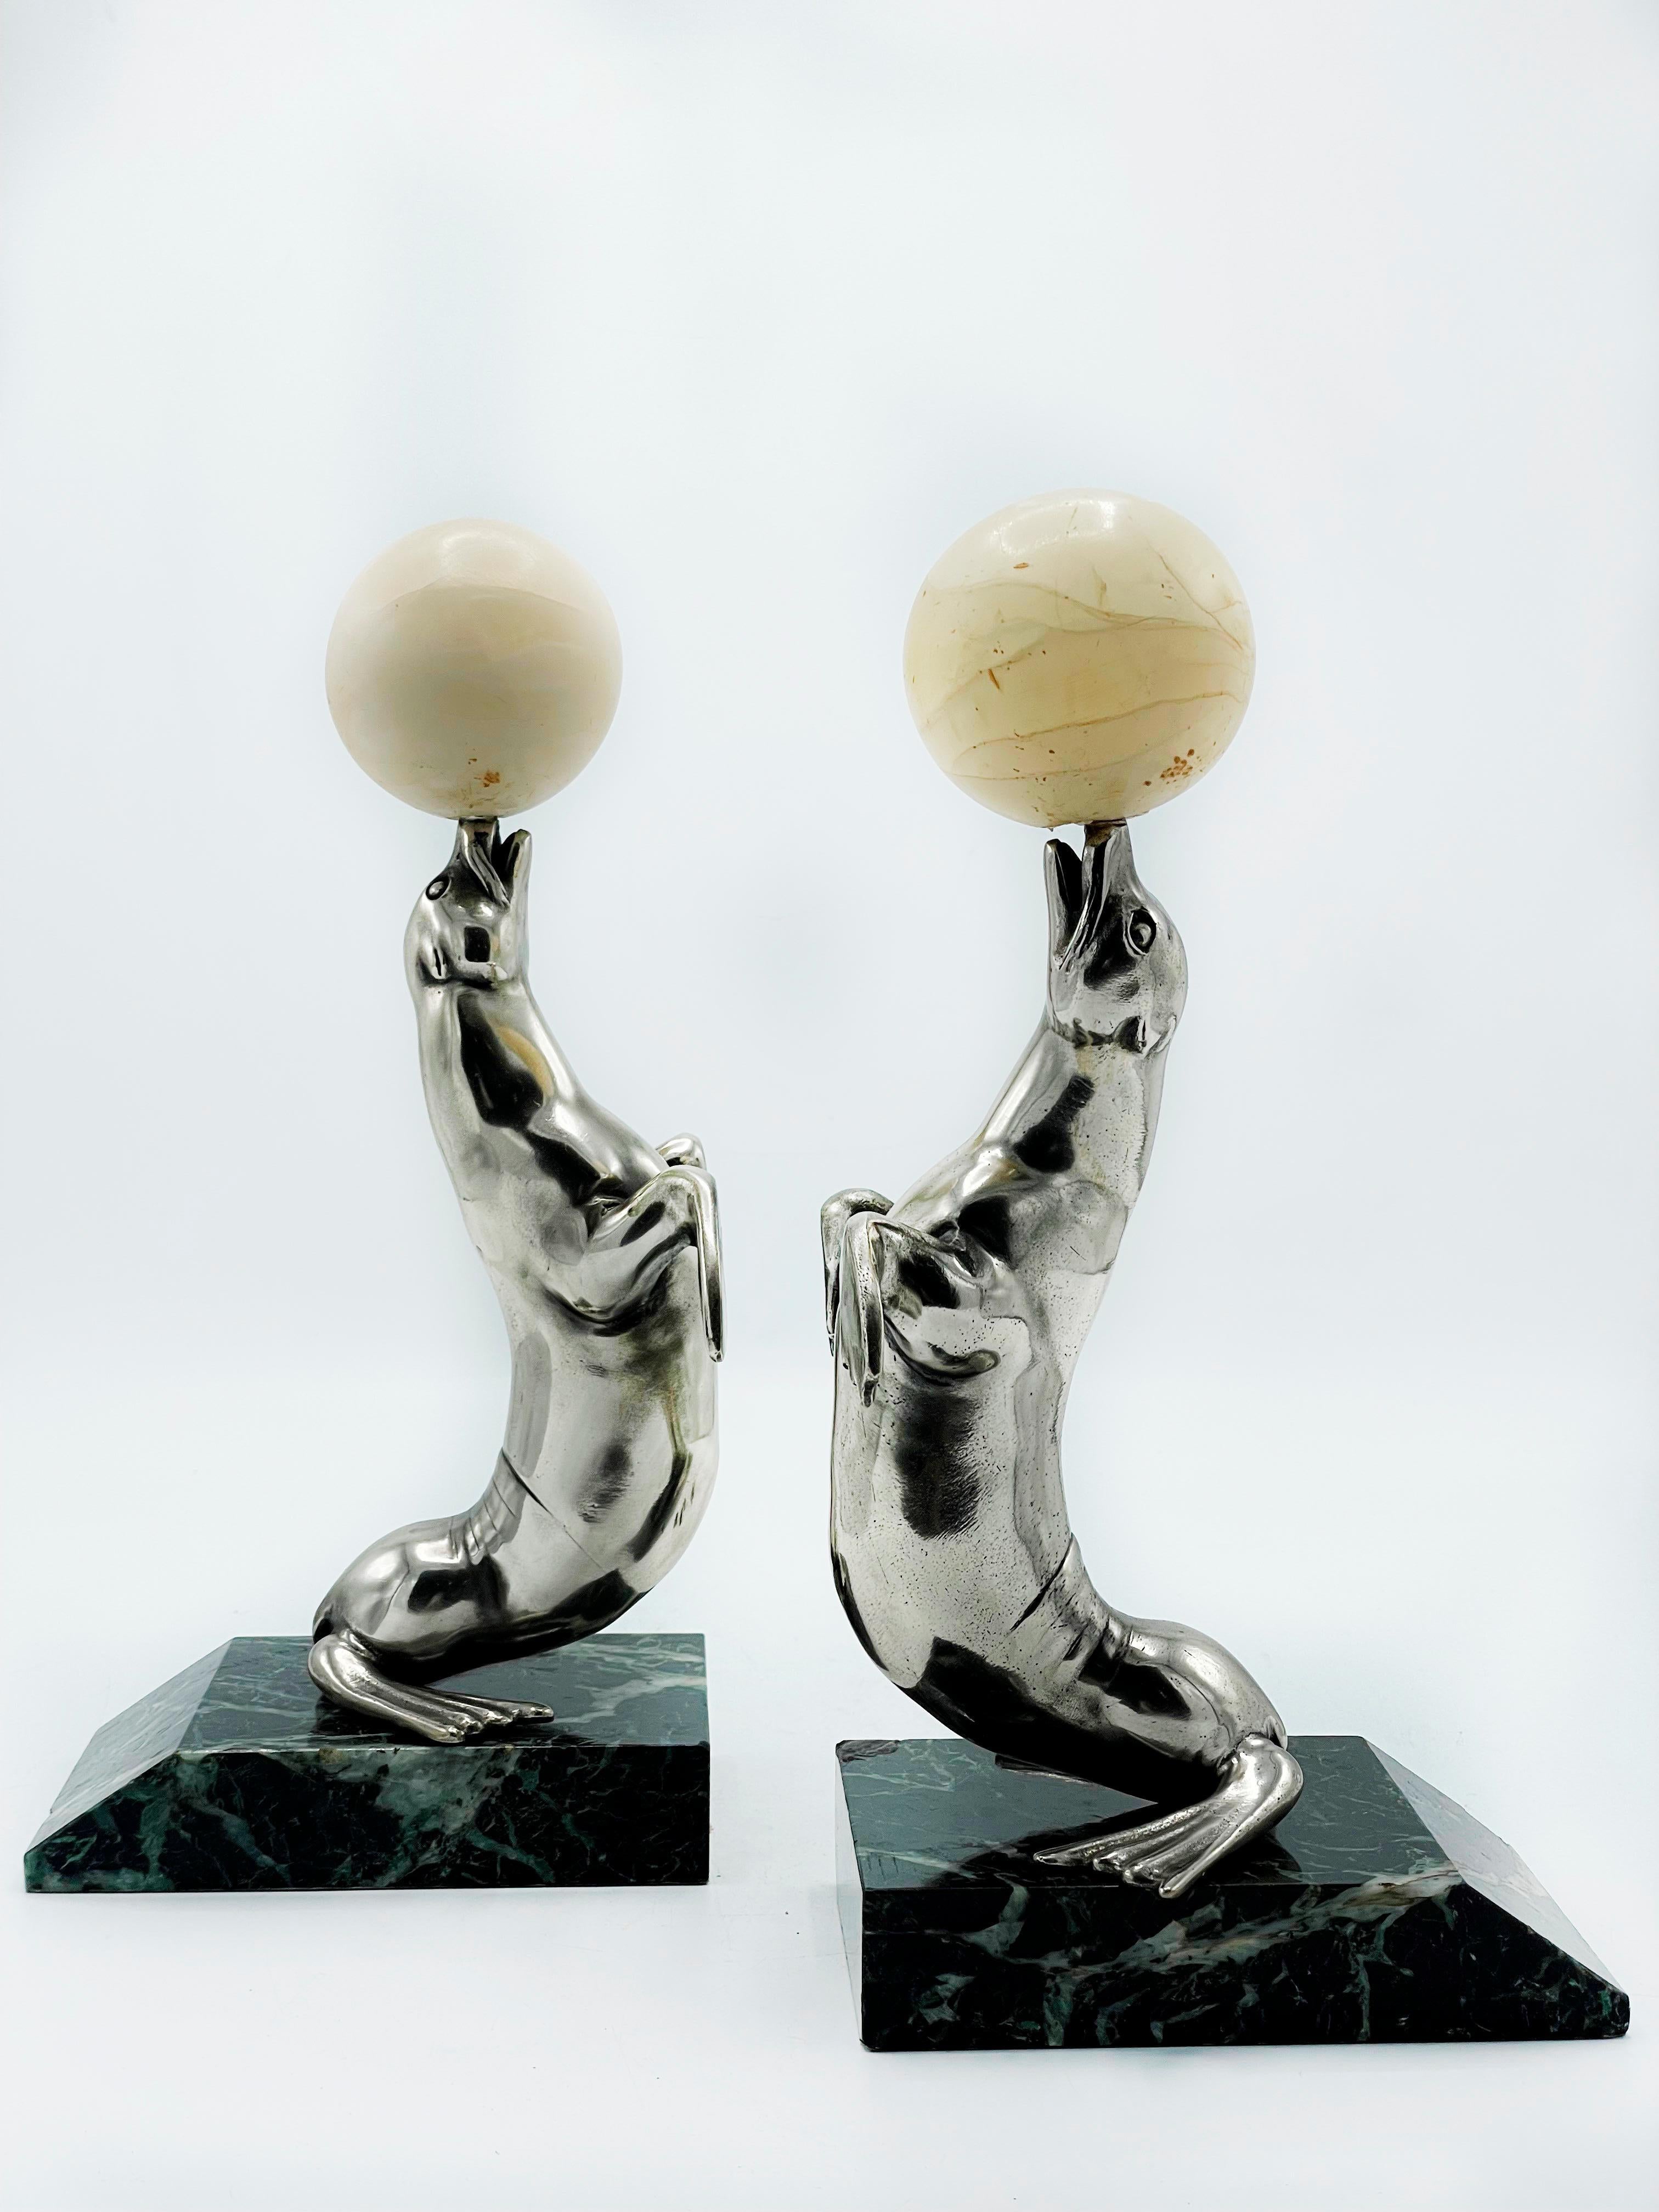 Art Deco French Marine Seal bookends, made in France, 1930s. 
Bronze and marble. Plated bronze. Marble balls.
Plated bronze. Marble balls.
Some small chips in the marble. Very good condition.